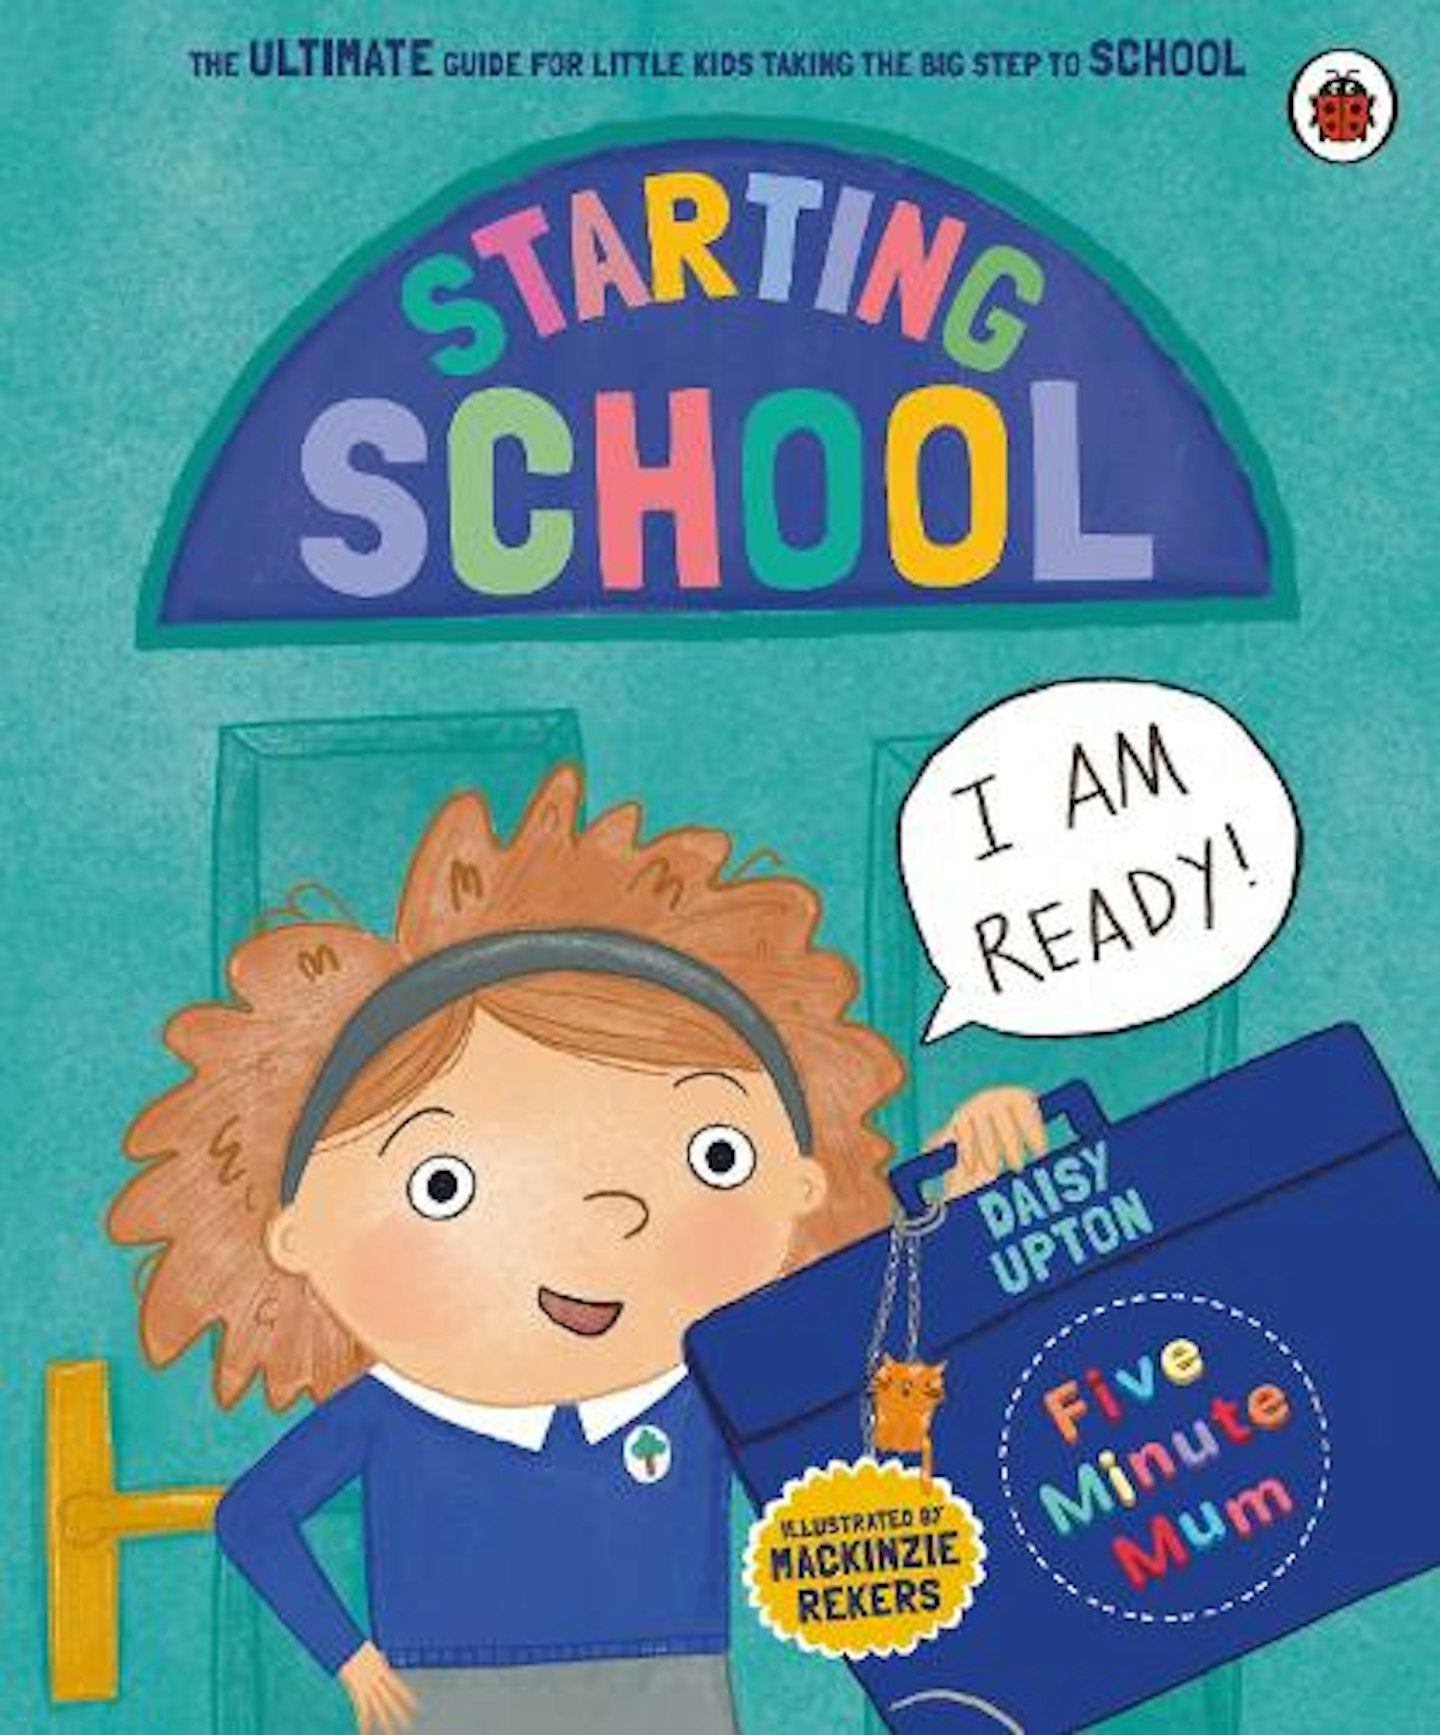 Five Minute Mum: Time for School by Daisy Upton (3+, Non-Fiction)